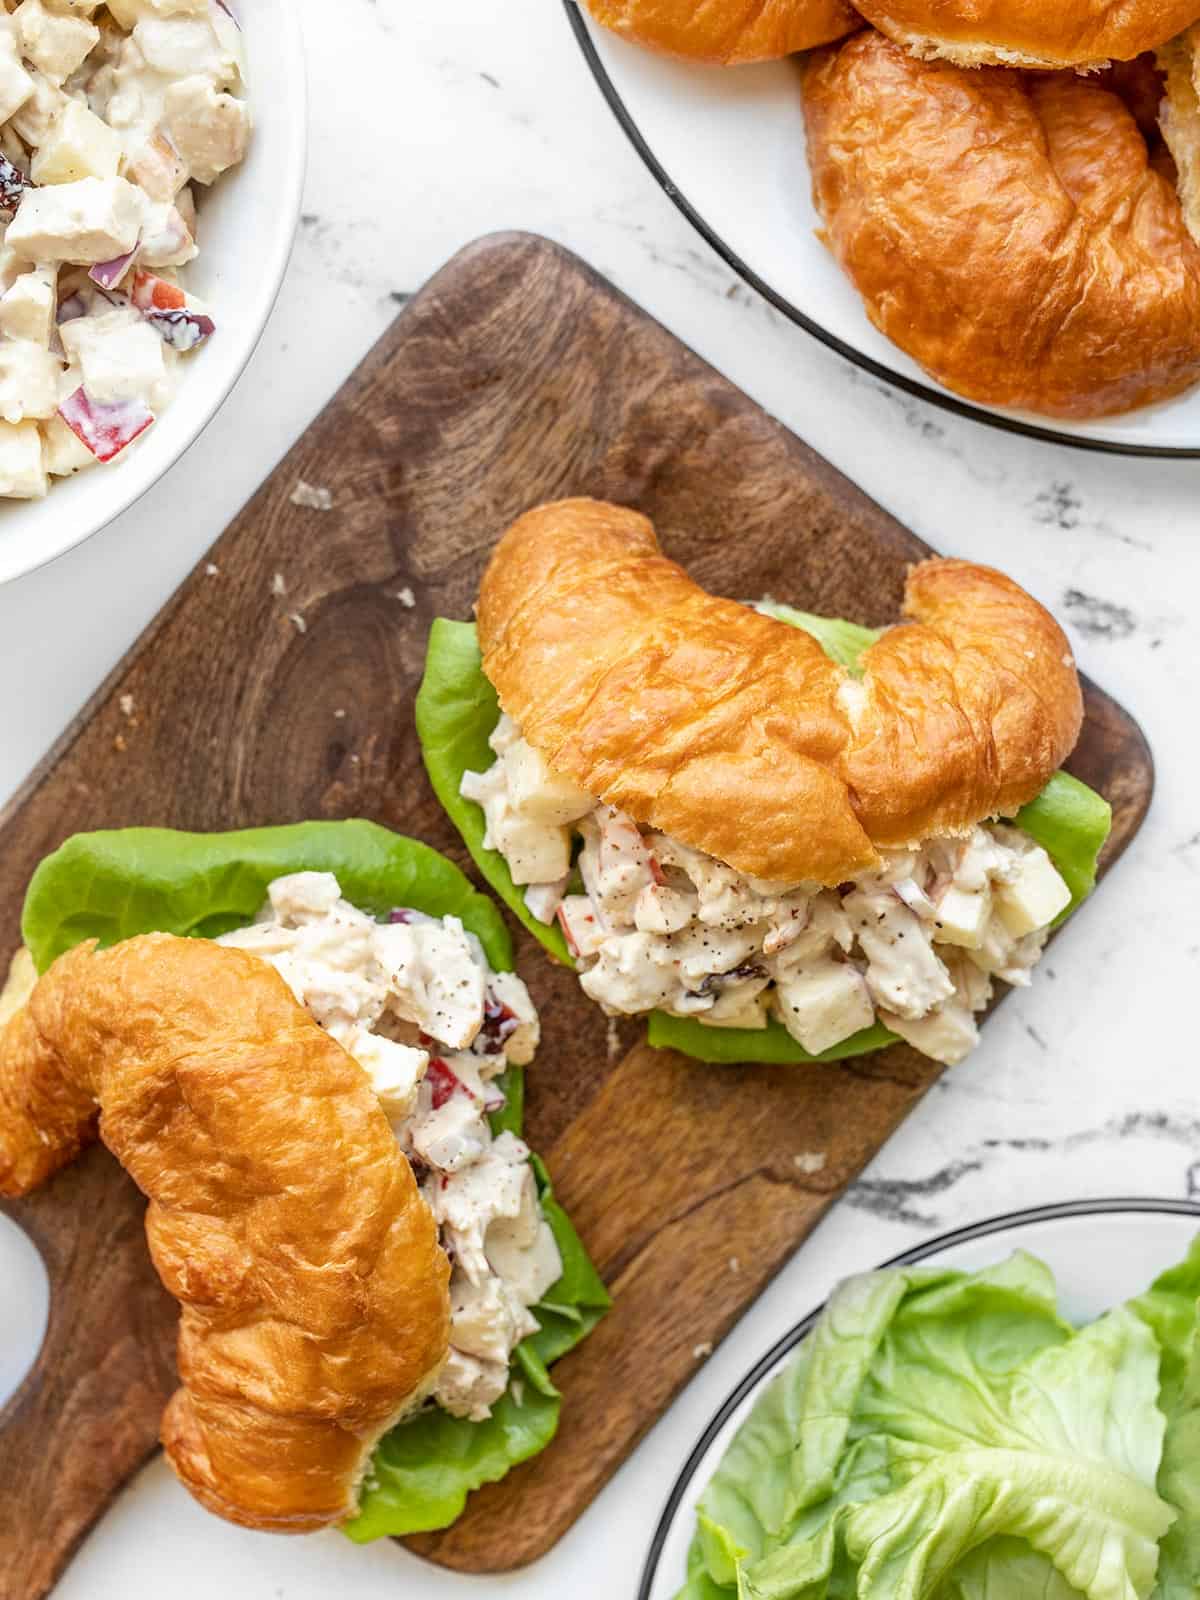 Chicken salad sandwiches made with croissants on a wooden cutting board